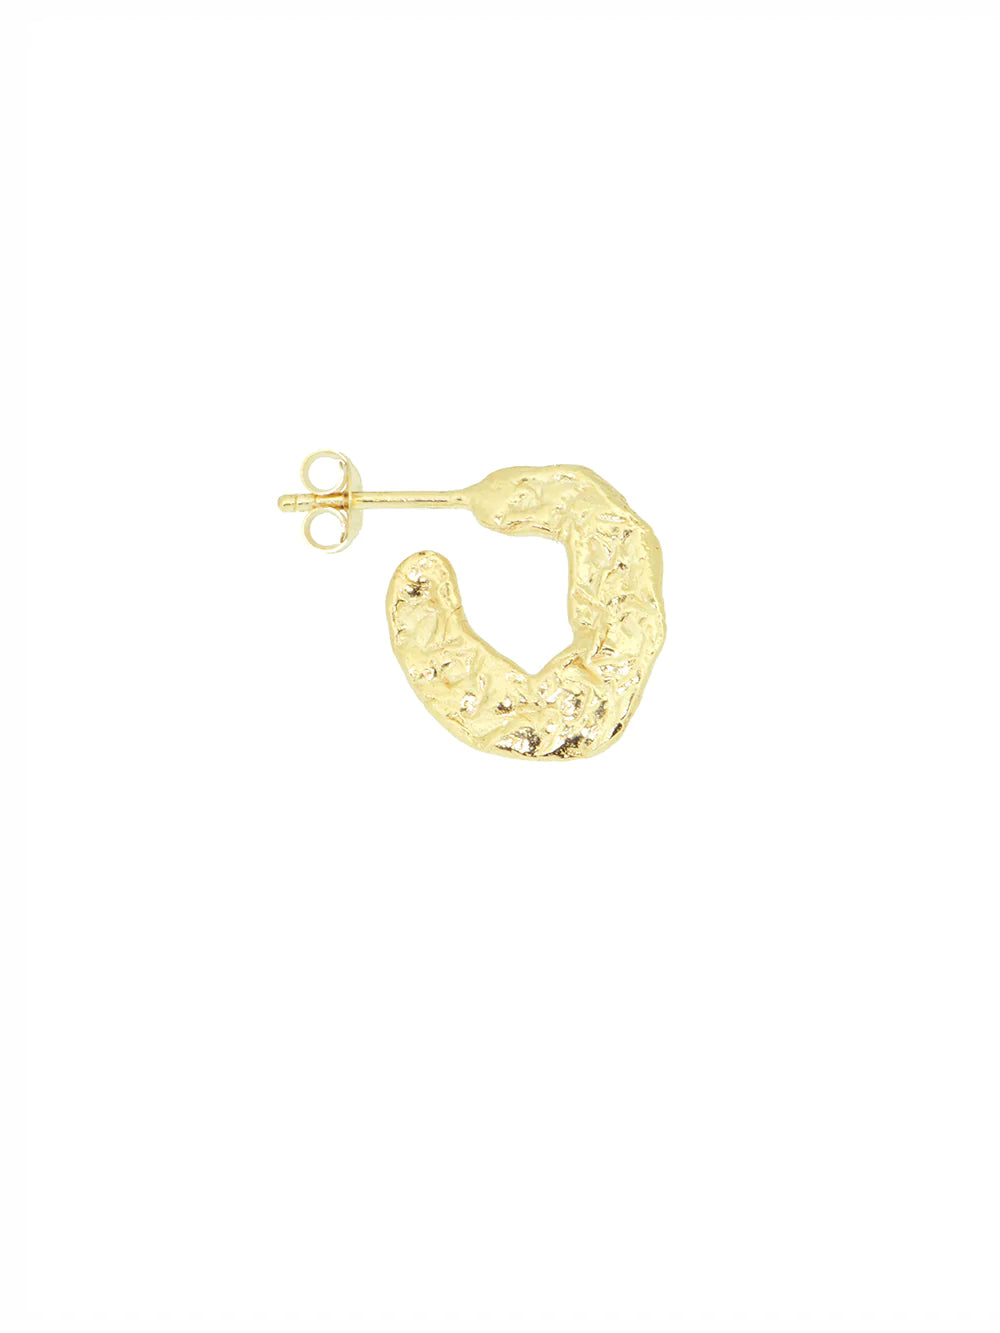 WALK WITH ME earring⎜Goldplated